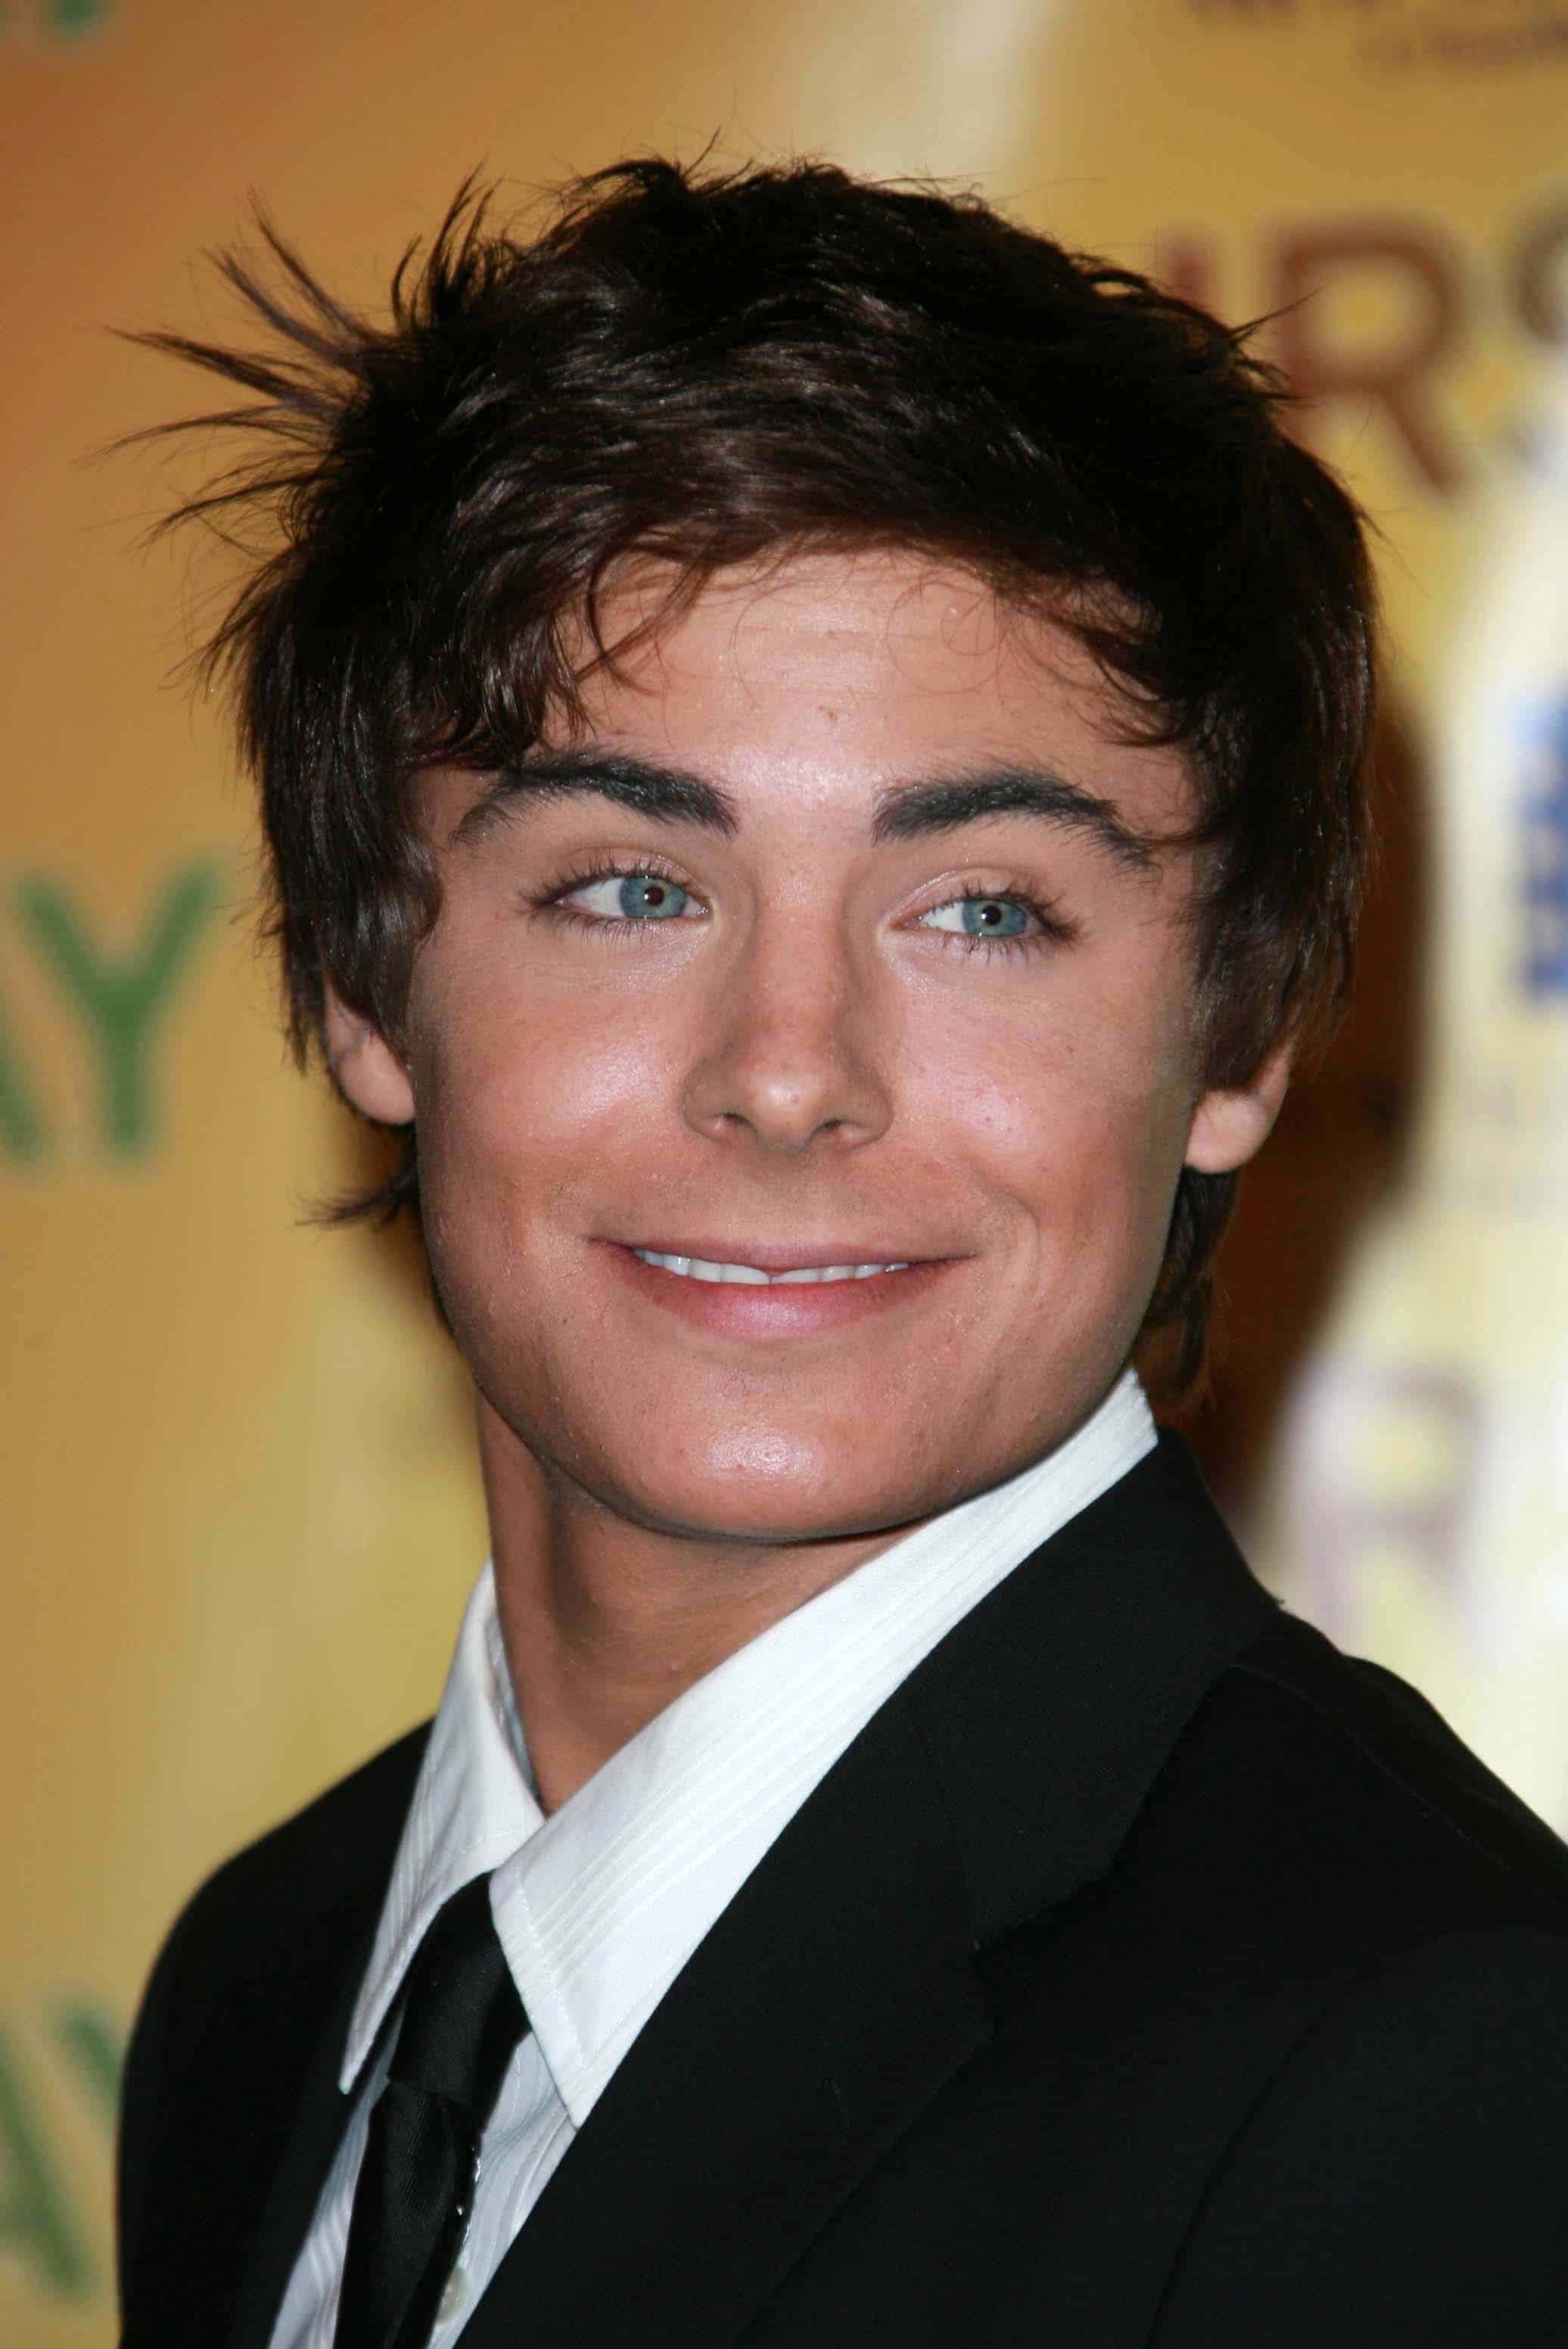 Zac Efron in his youth, at the ShoWest 2007 Photocall for "Hairspray". Photo taken on March 14, 2007.